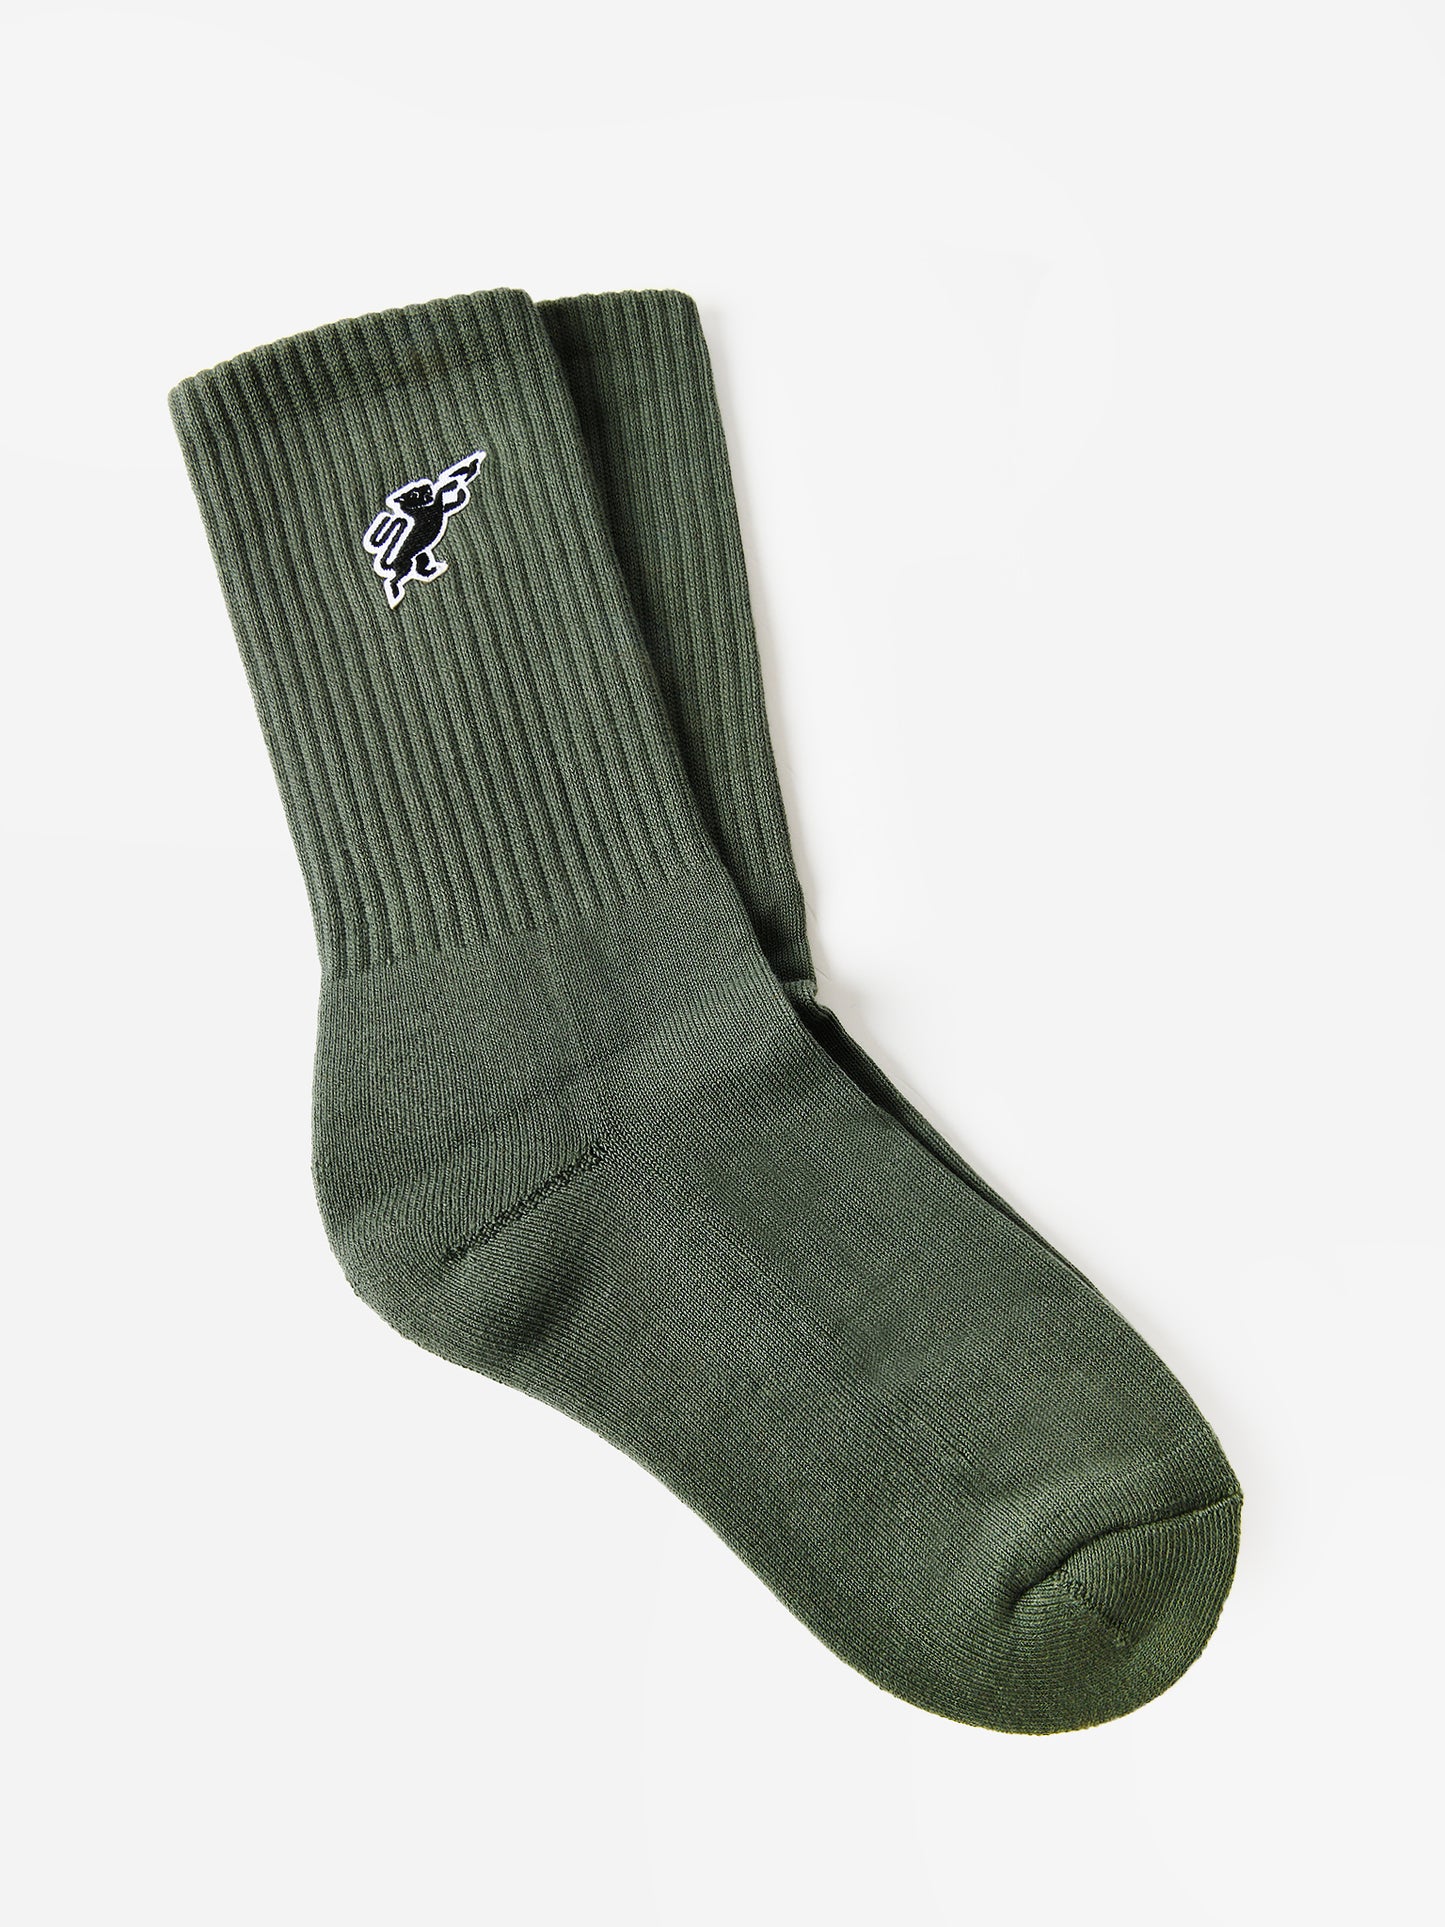 Weekend Men's Panther Patch Socks